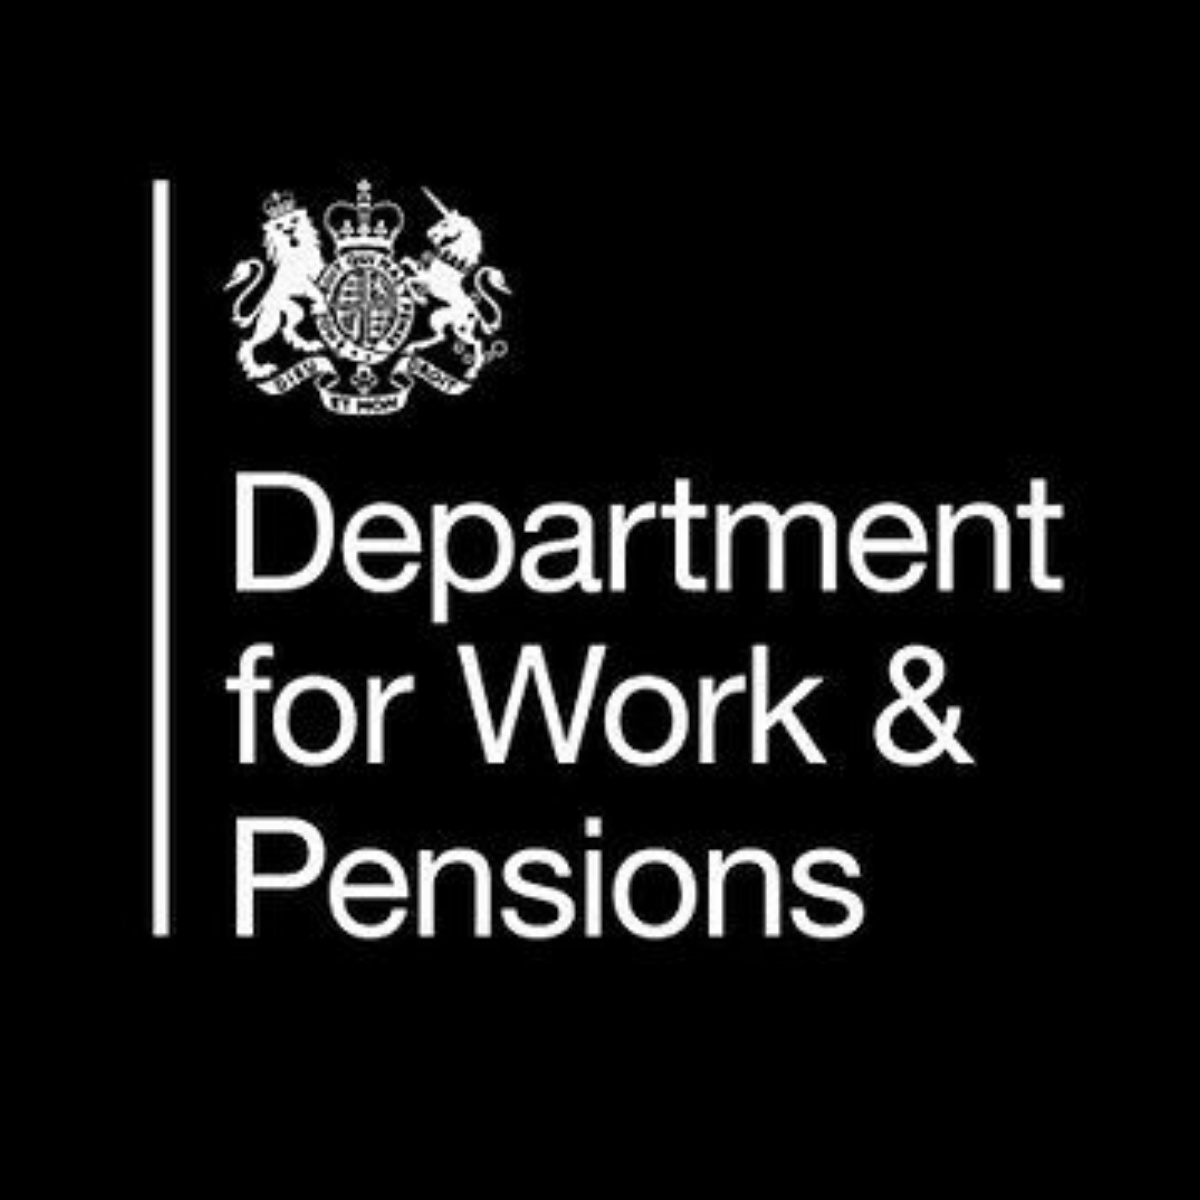 Department of work and pensions